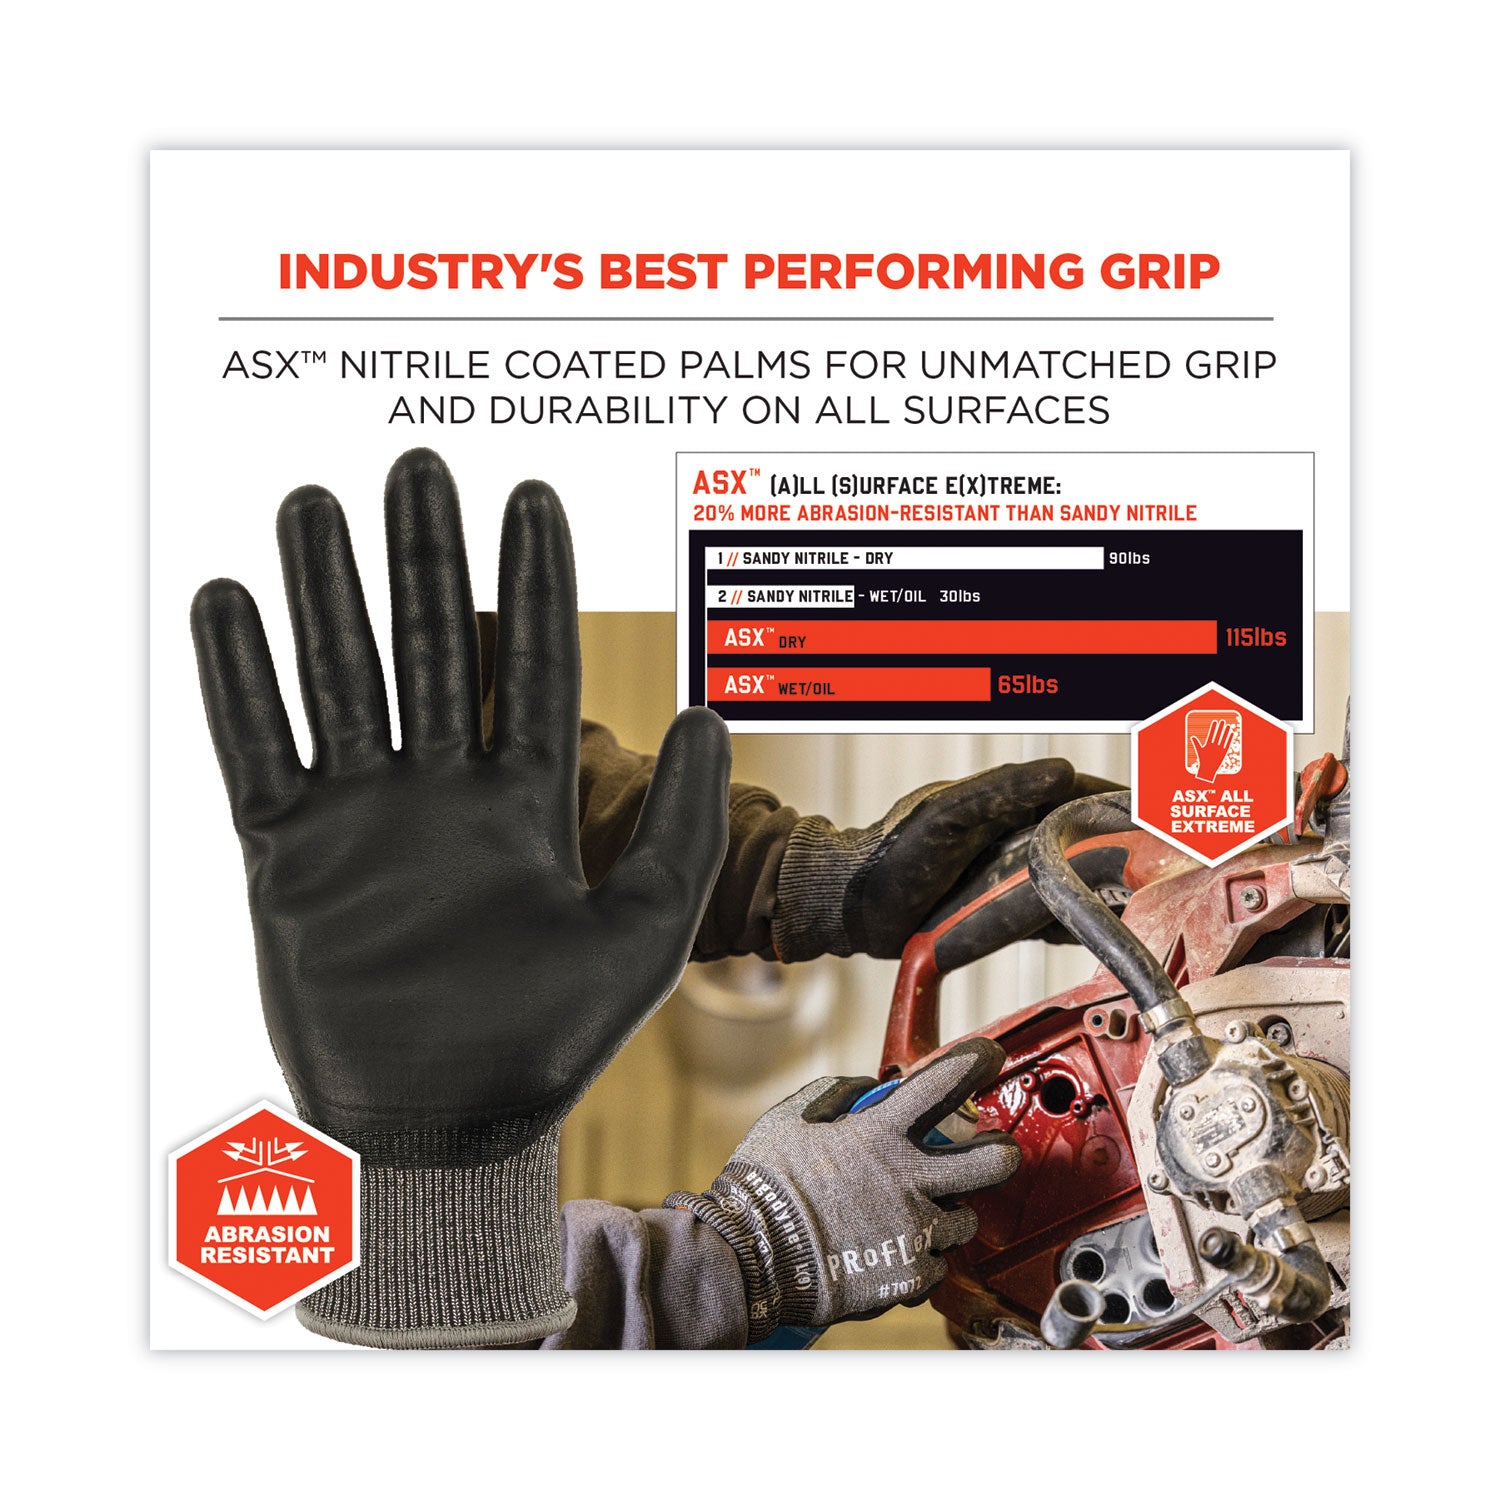 proflex-7072-ansi-a7-nitrile-coated-cr-gloves-gray-x-large-12-pairs-pack-ships-in-1-3-business-days_ego10305 - 6